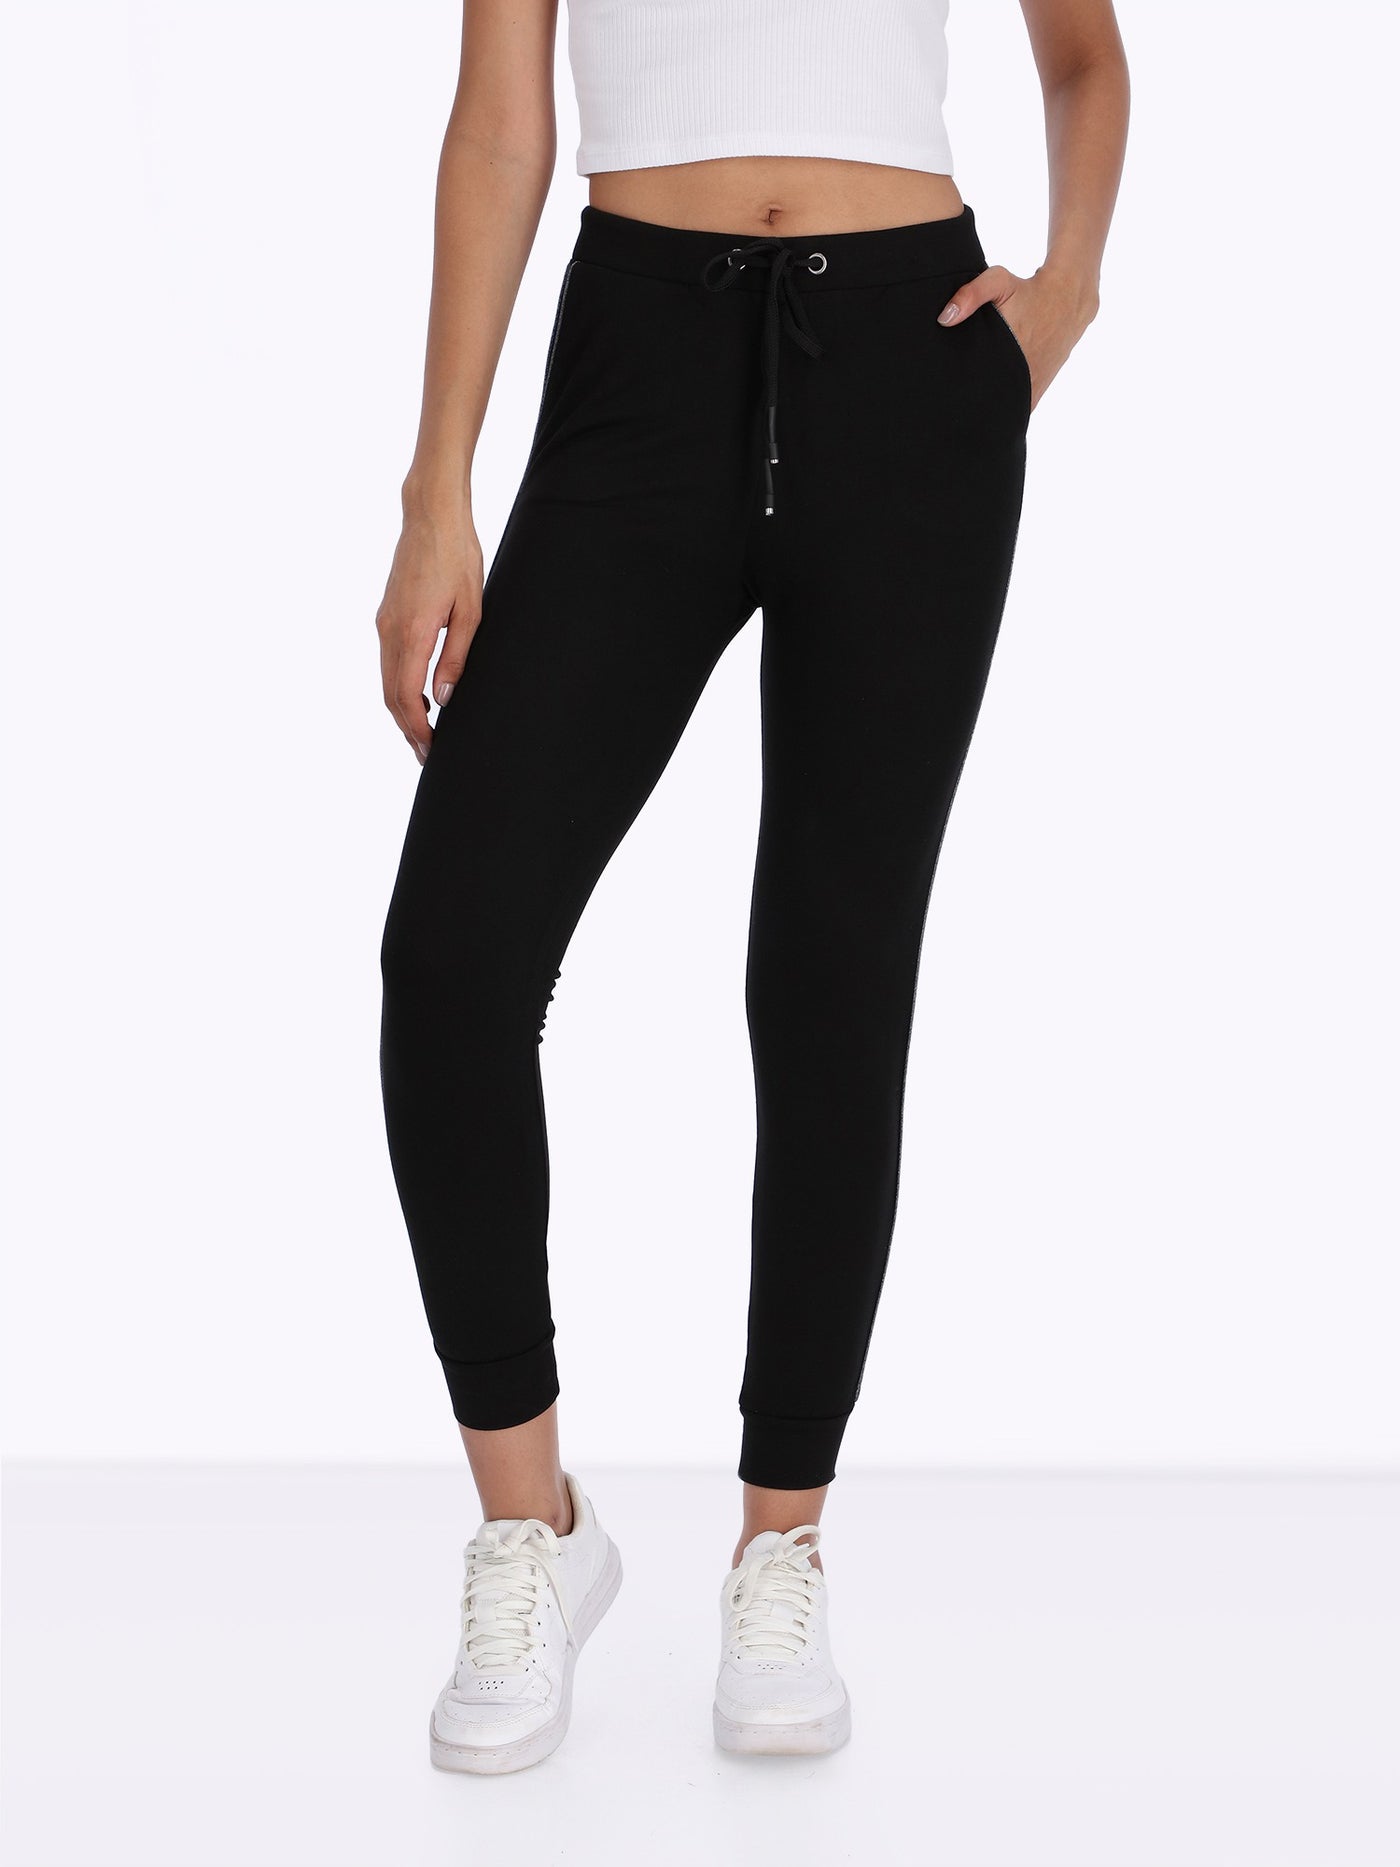 OR Women's Contrast Trim Joggers